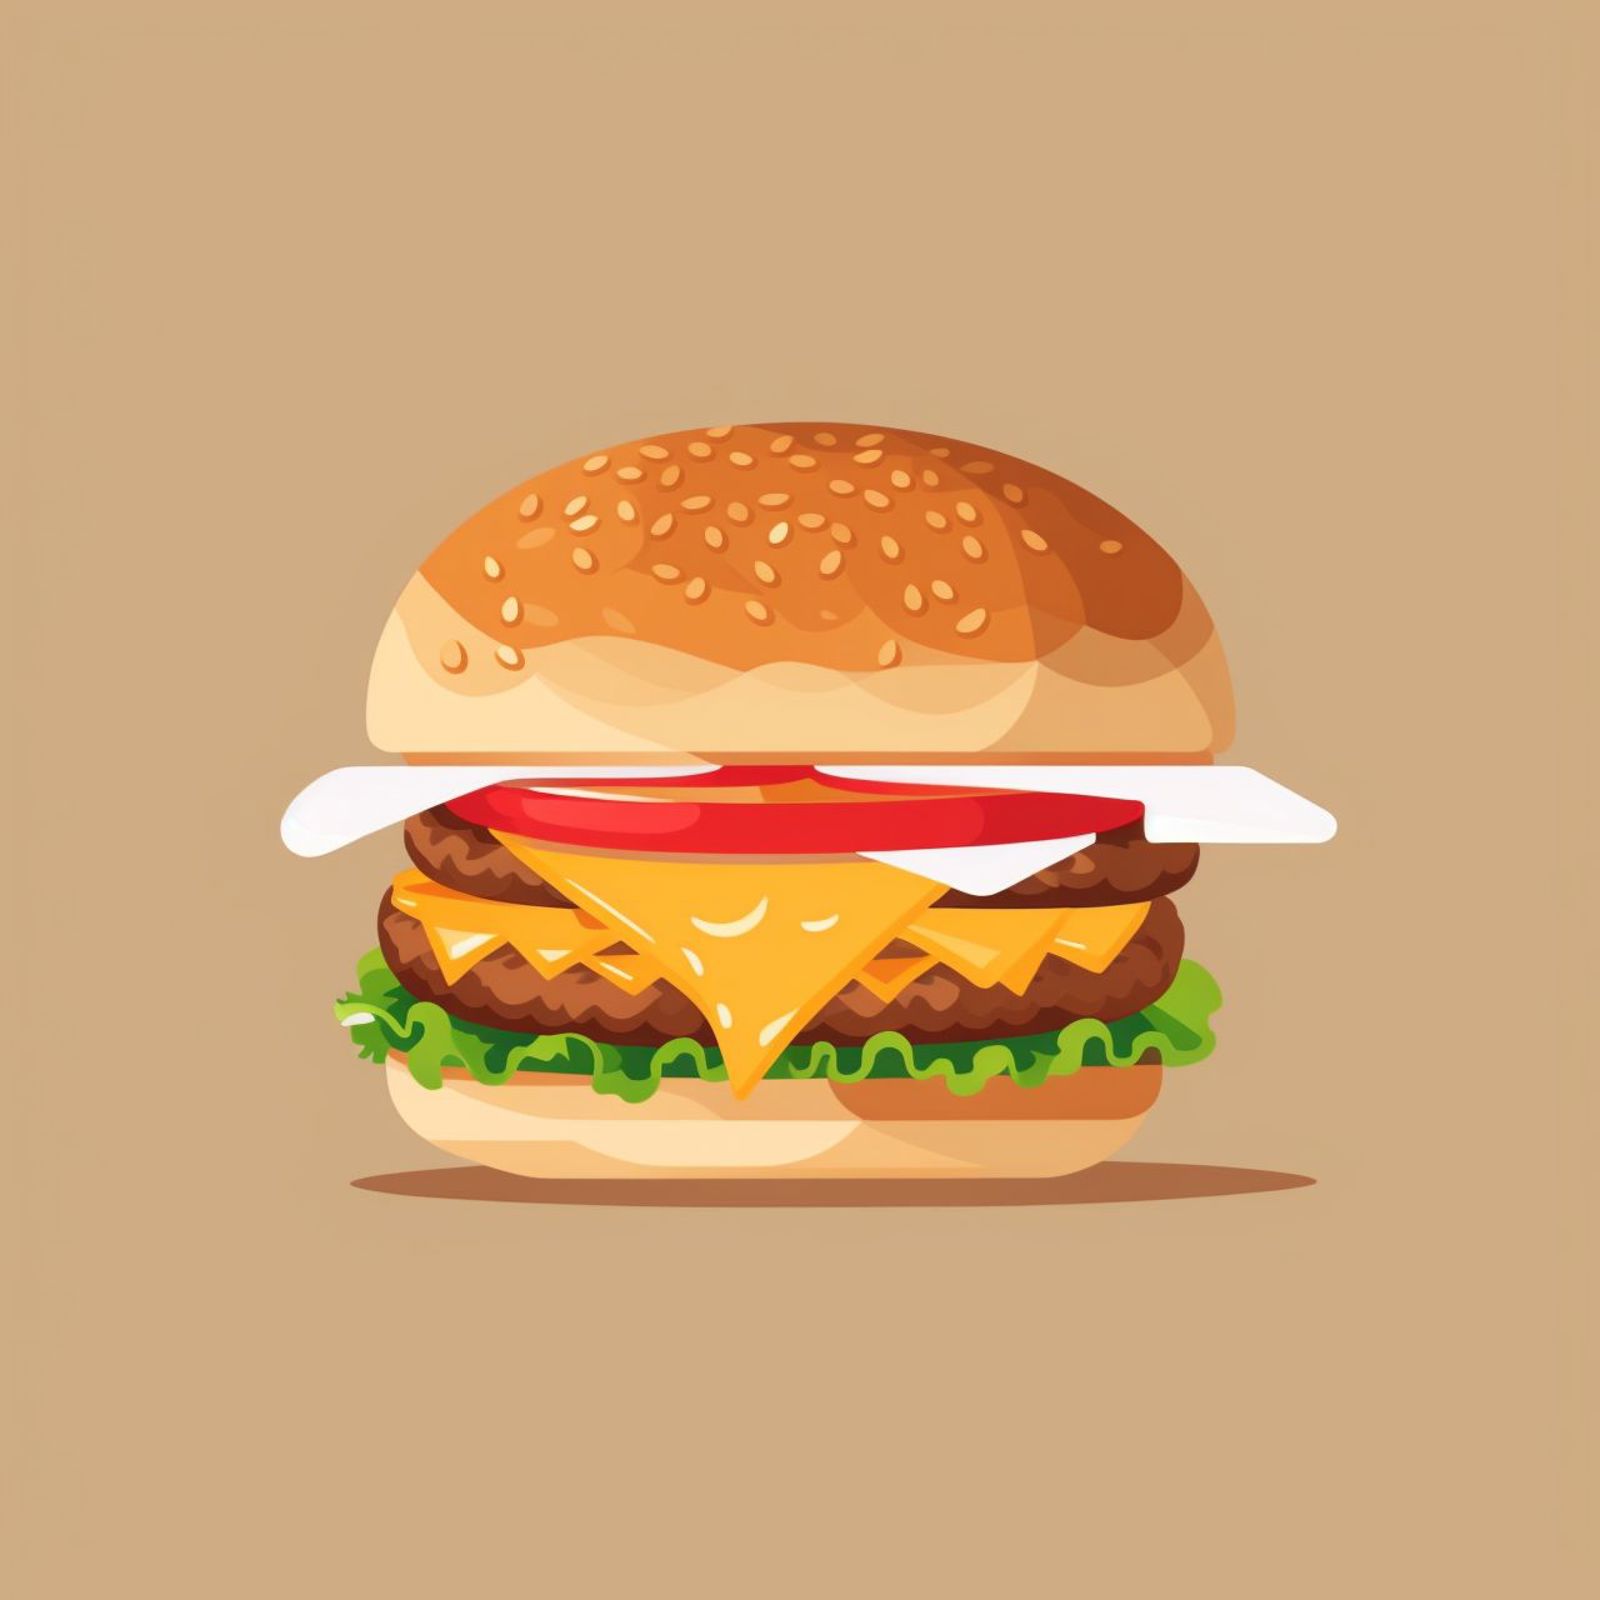 A cheeseburger with lettuce and tomato on a bun on a background of brown.